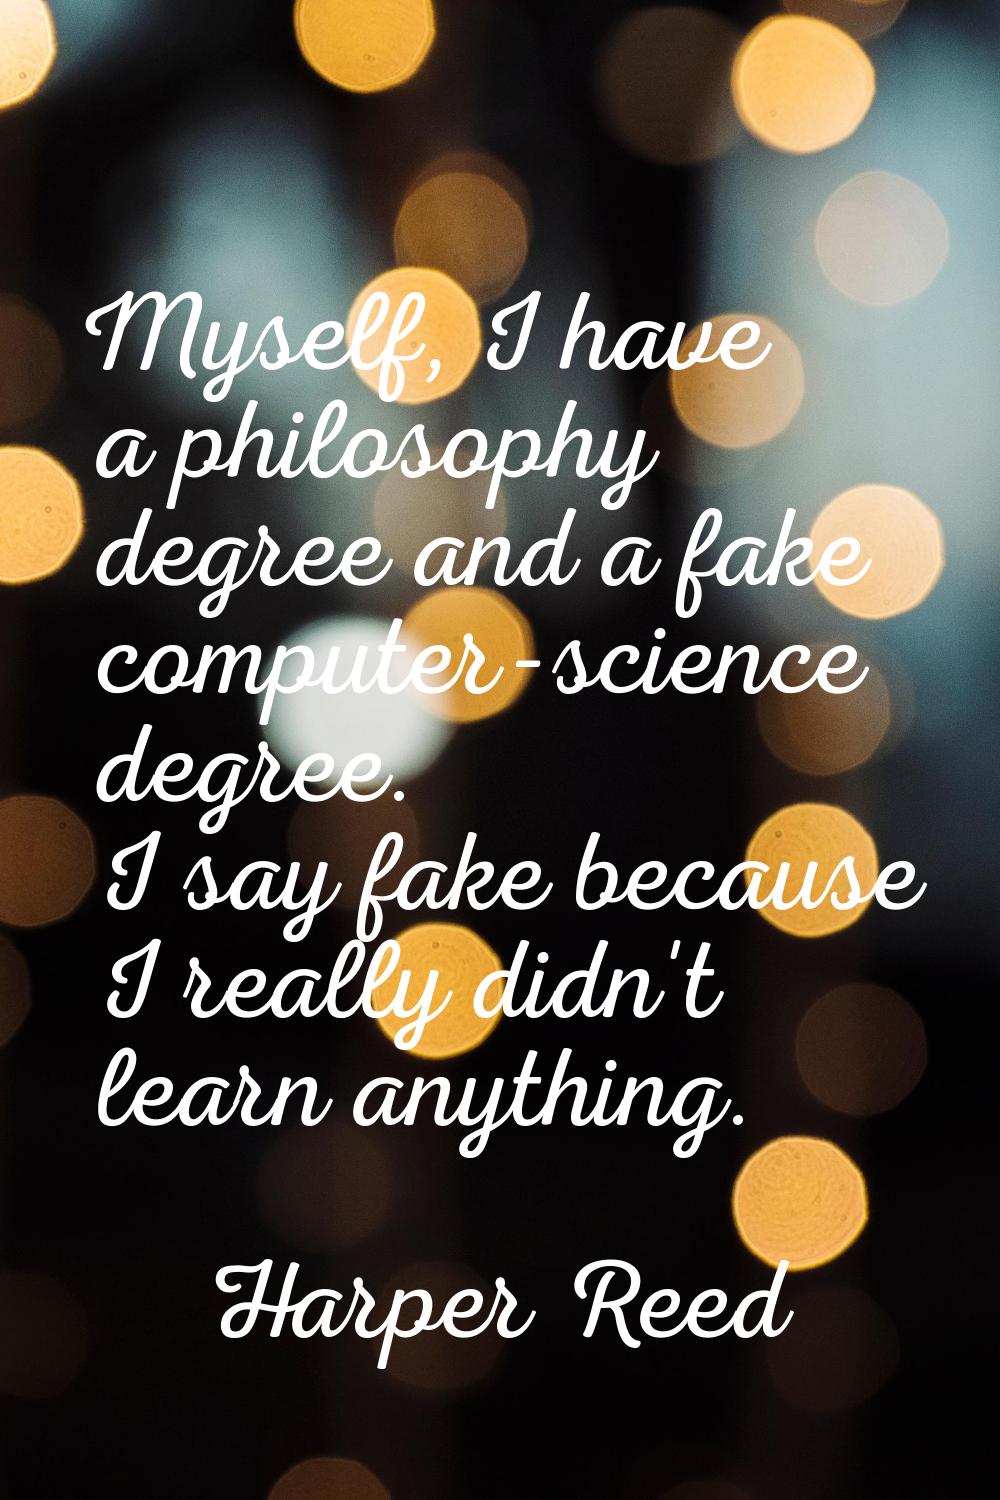 Myself, I have a philosophy degree and a fake computer-science degree. I say fake because I really 